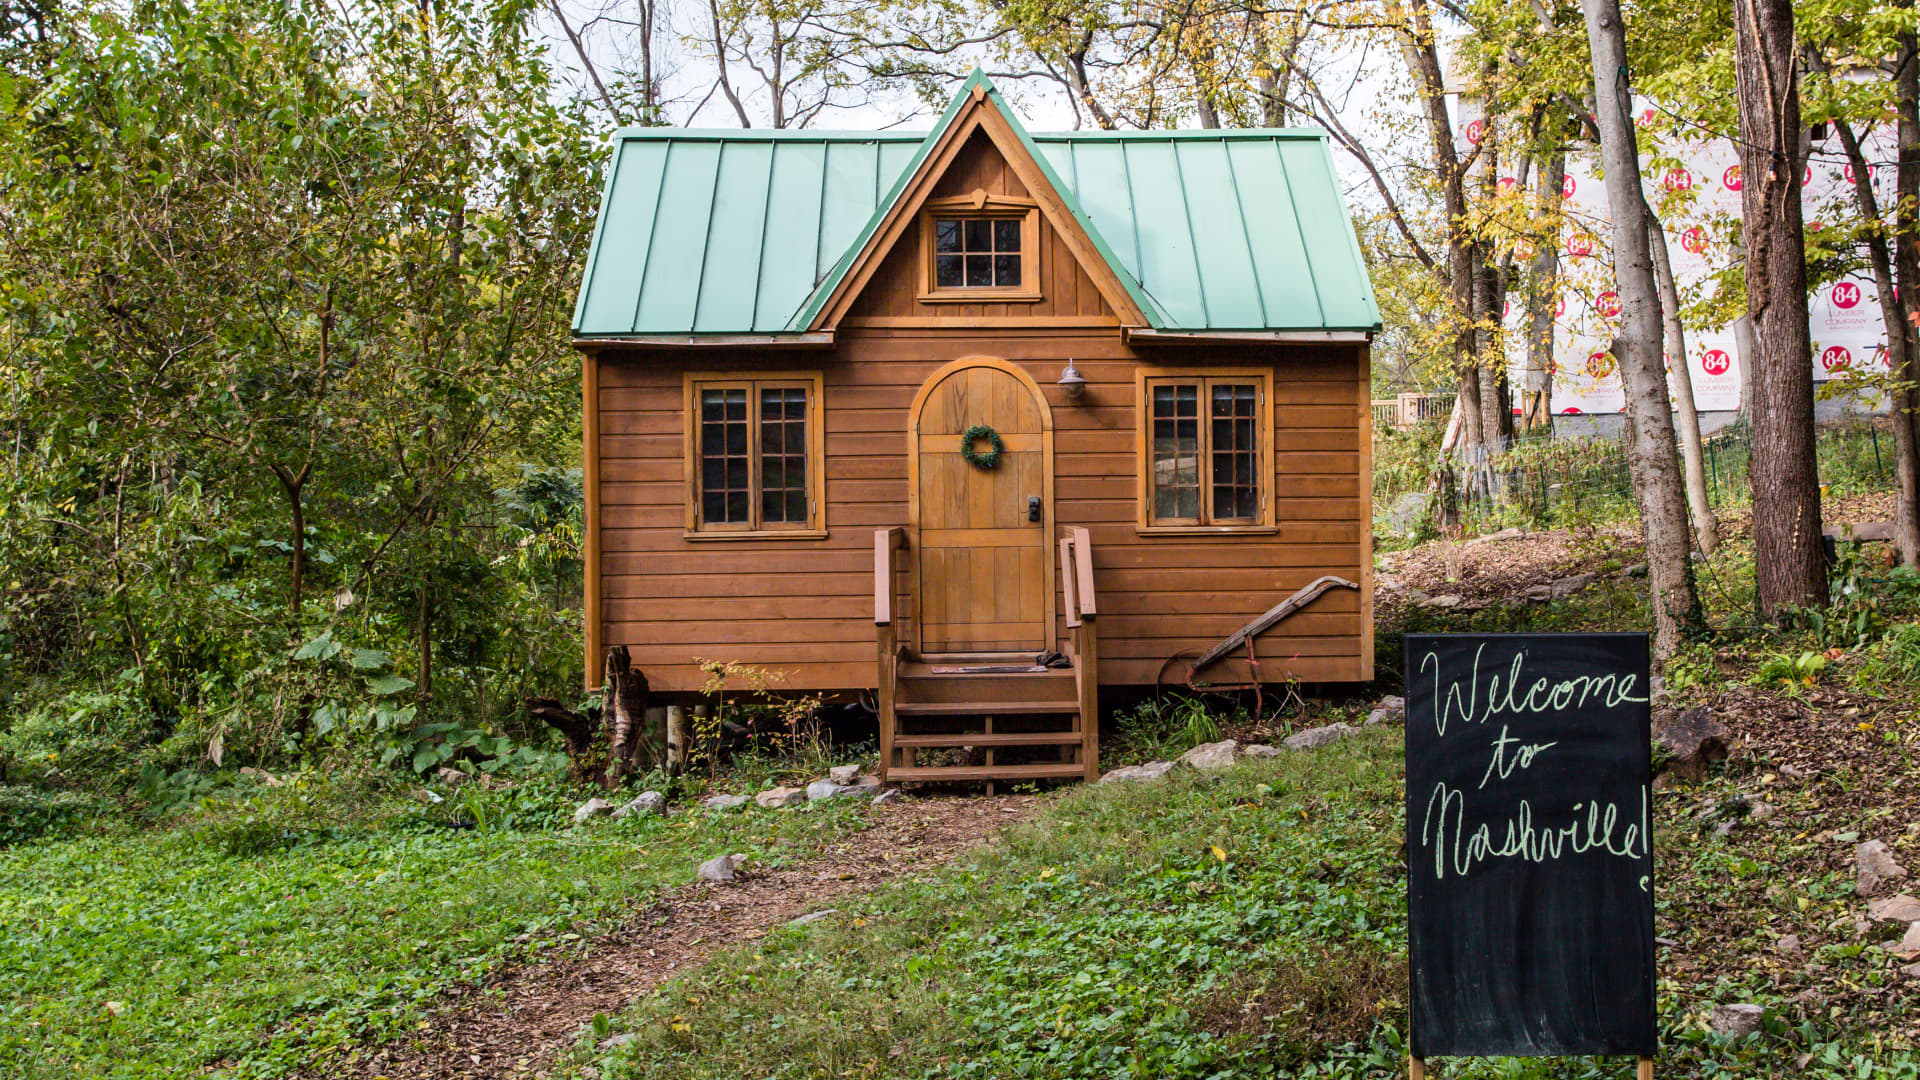 This tiny home in Nashville is one of the most wish listed in Tennessee.